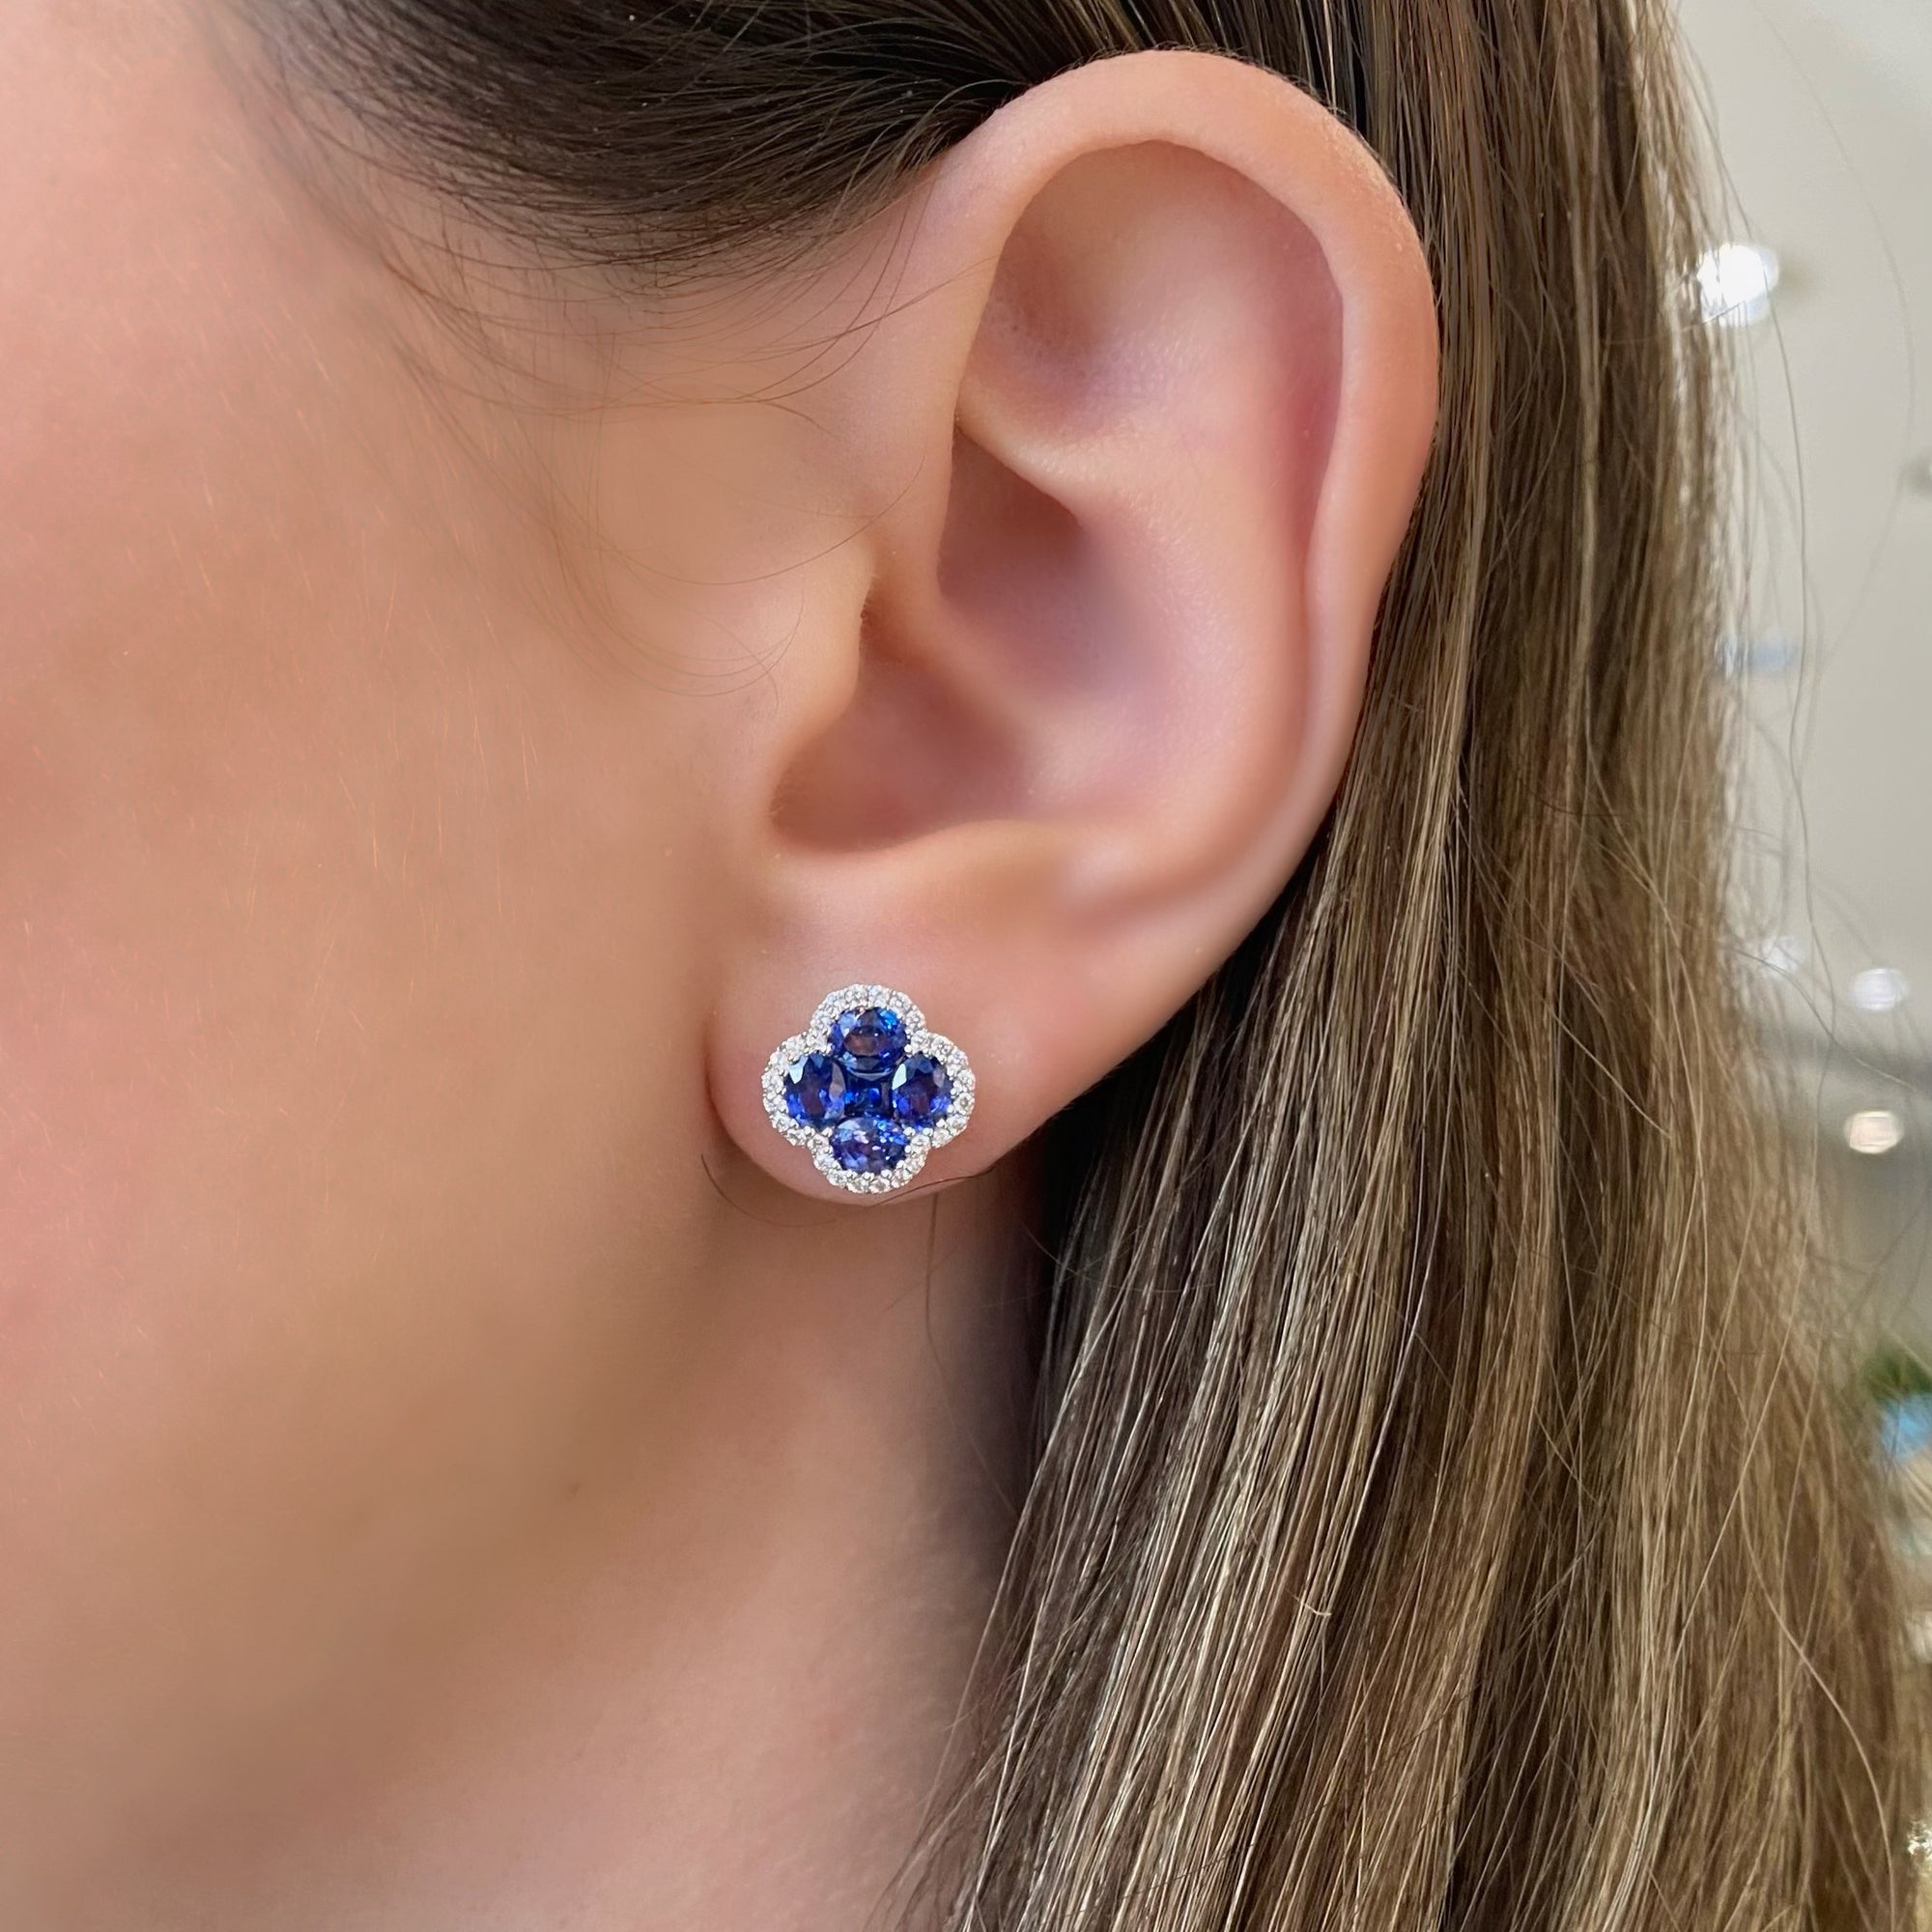 sapphire & diamond flower stud earrings - 18K gold weighing 3.37 grams  - 8 oval-shaped sapphires totaling 2.40 carats  - 2 princess-cut sapphires totaling 0.34 carats  - 56 round diamonds totaling 0.28 carats